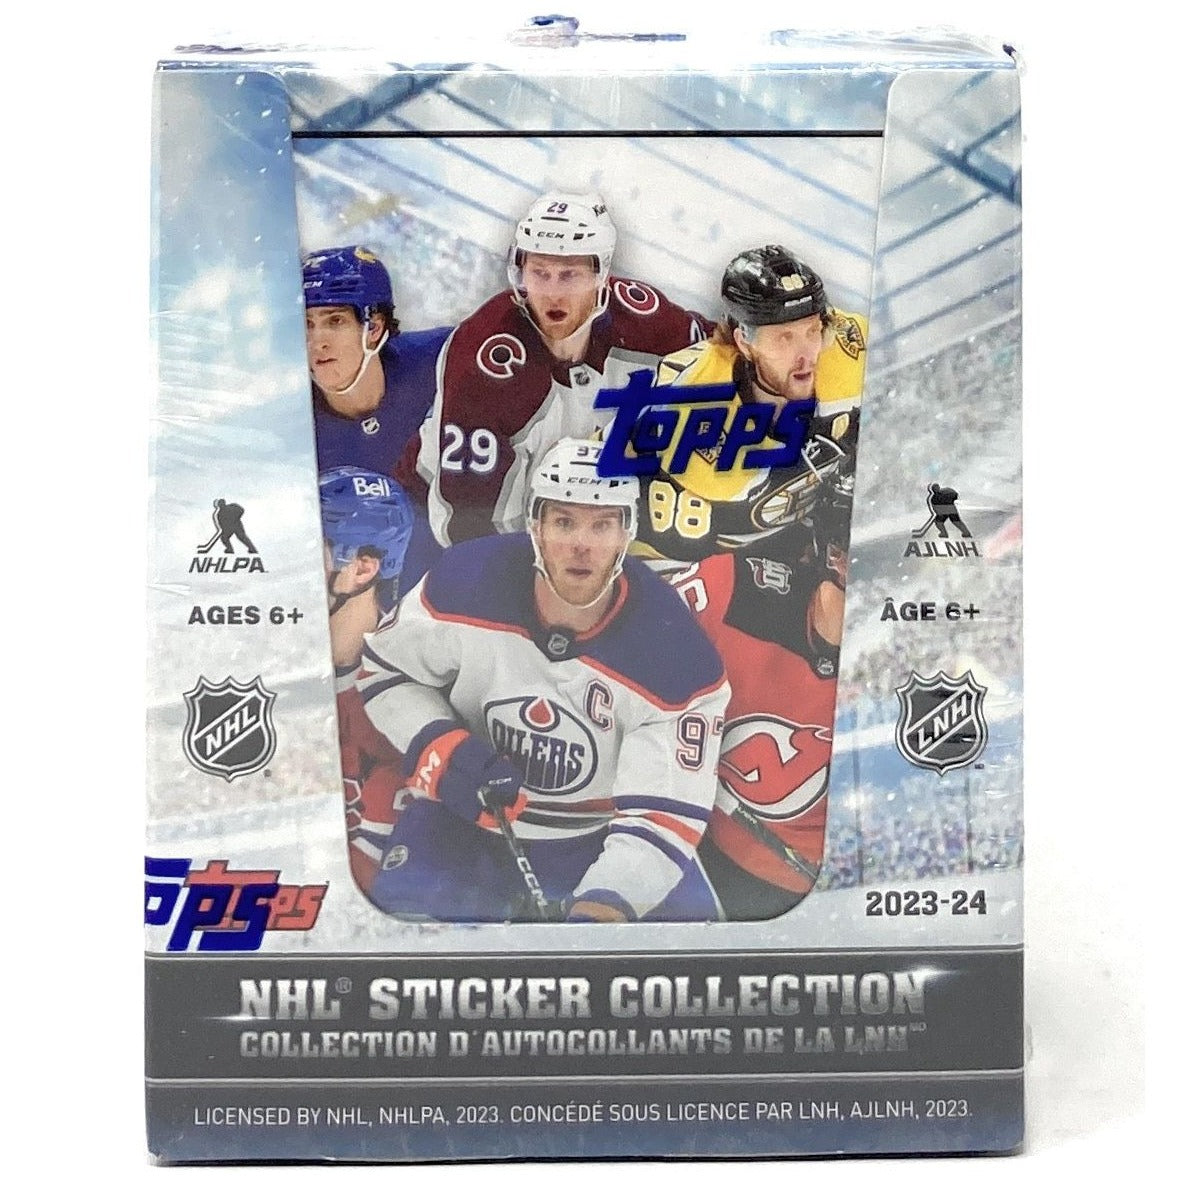 2023-24 Topps NHL Hockey Sticker Collection Box (50 Packs) 887521121632 - King Card Canada